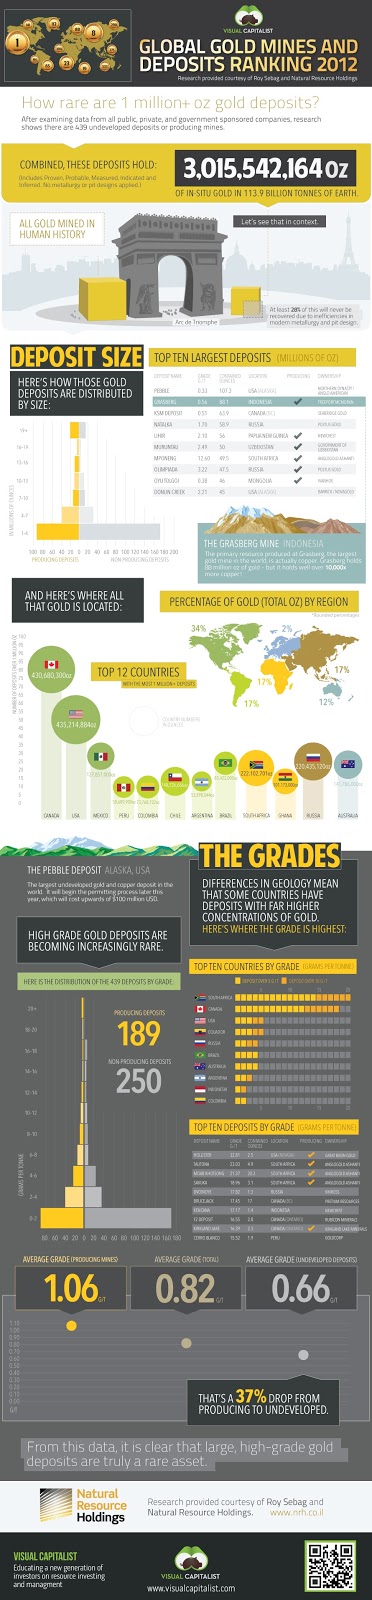 Global Gold Mines and Deposits Ranking 2012